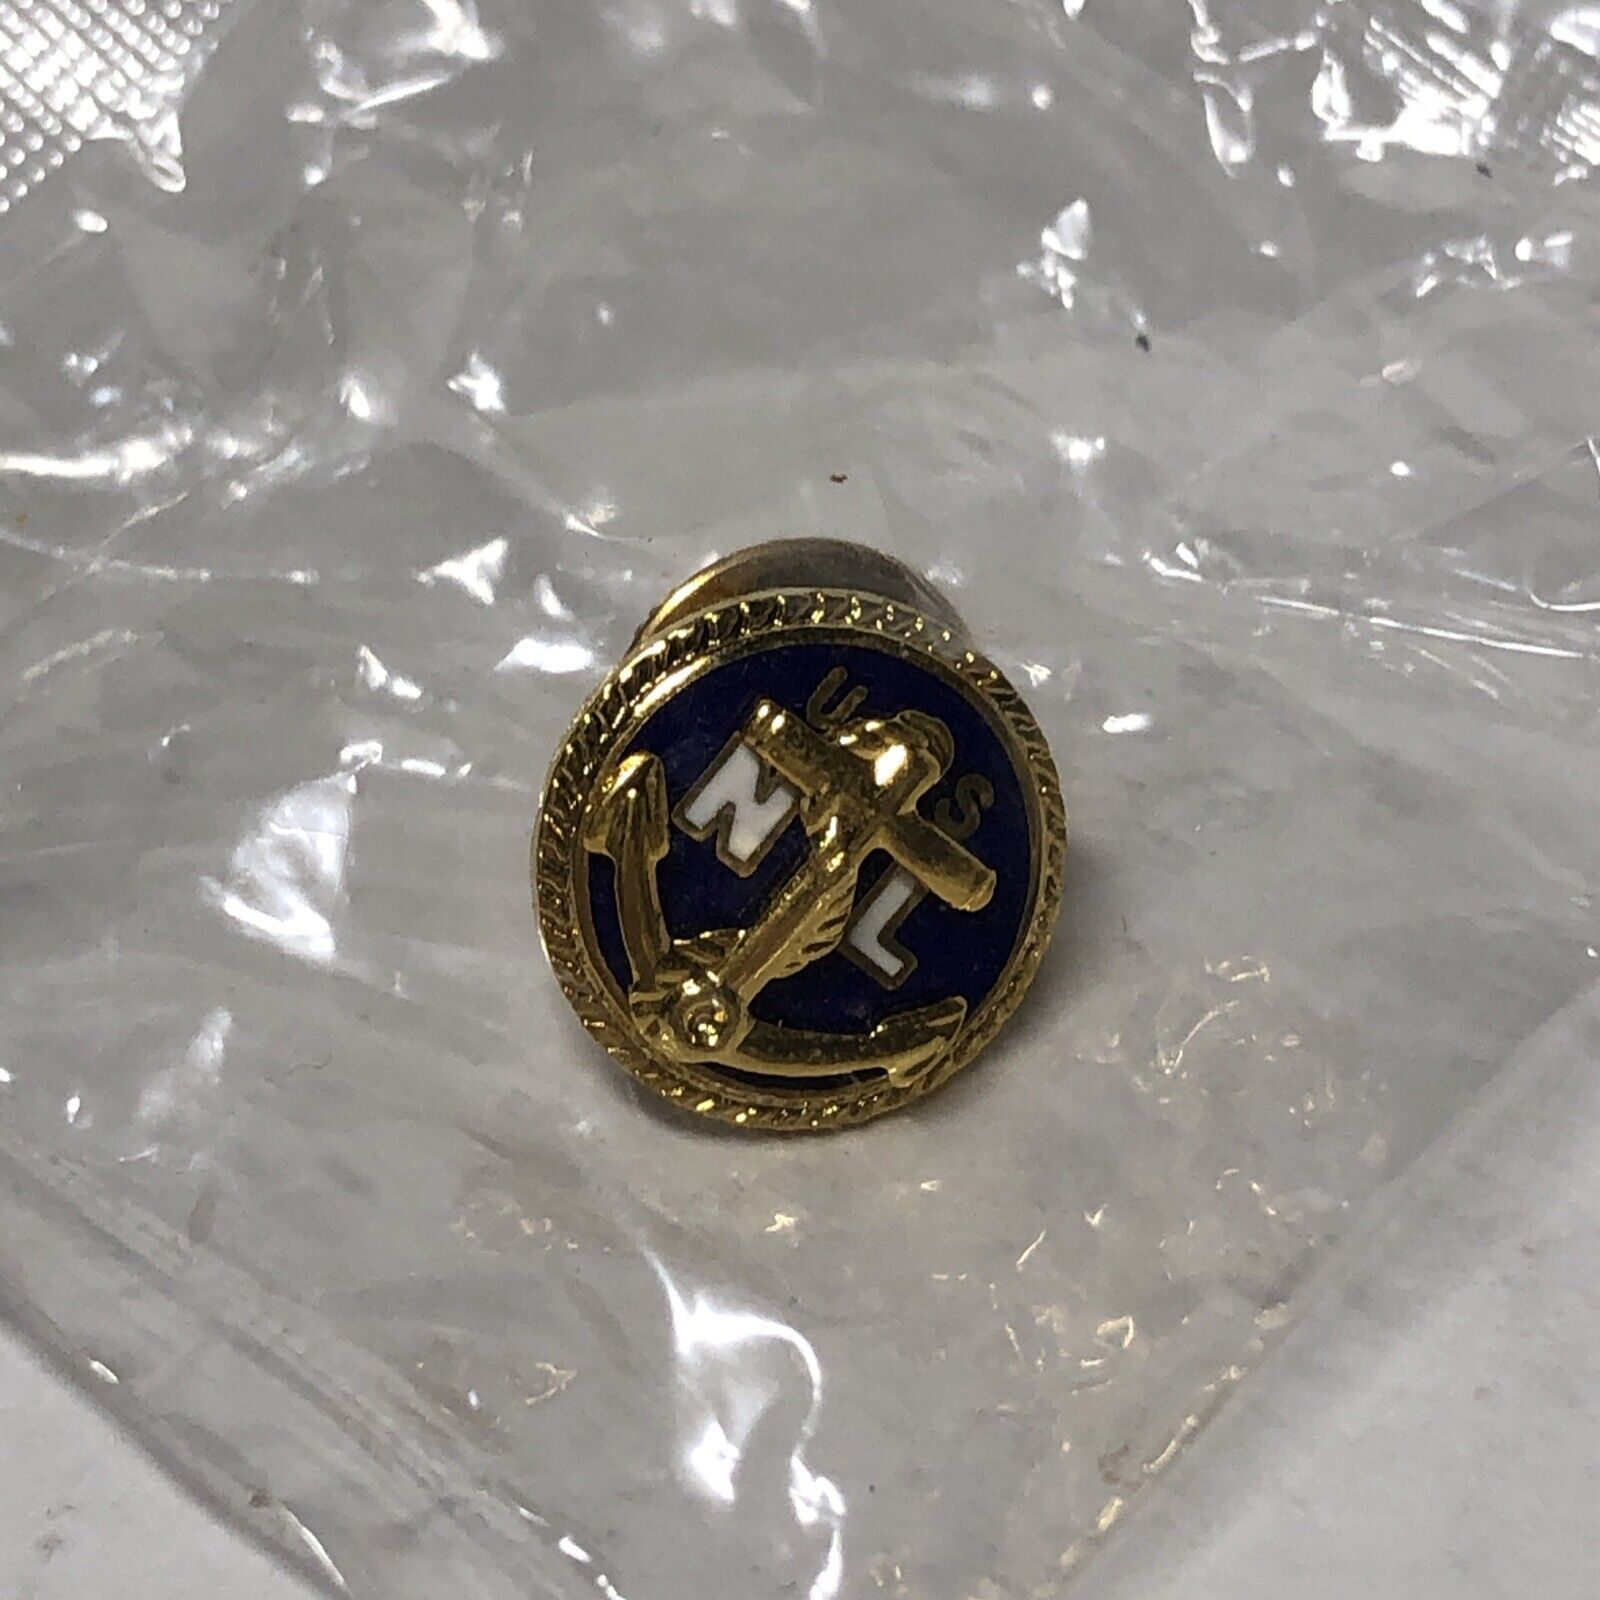 U.S. N L - Navy League  3D Gold and Blue colored  Tie Tac Pin New in Bag